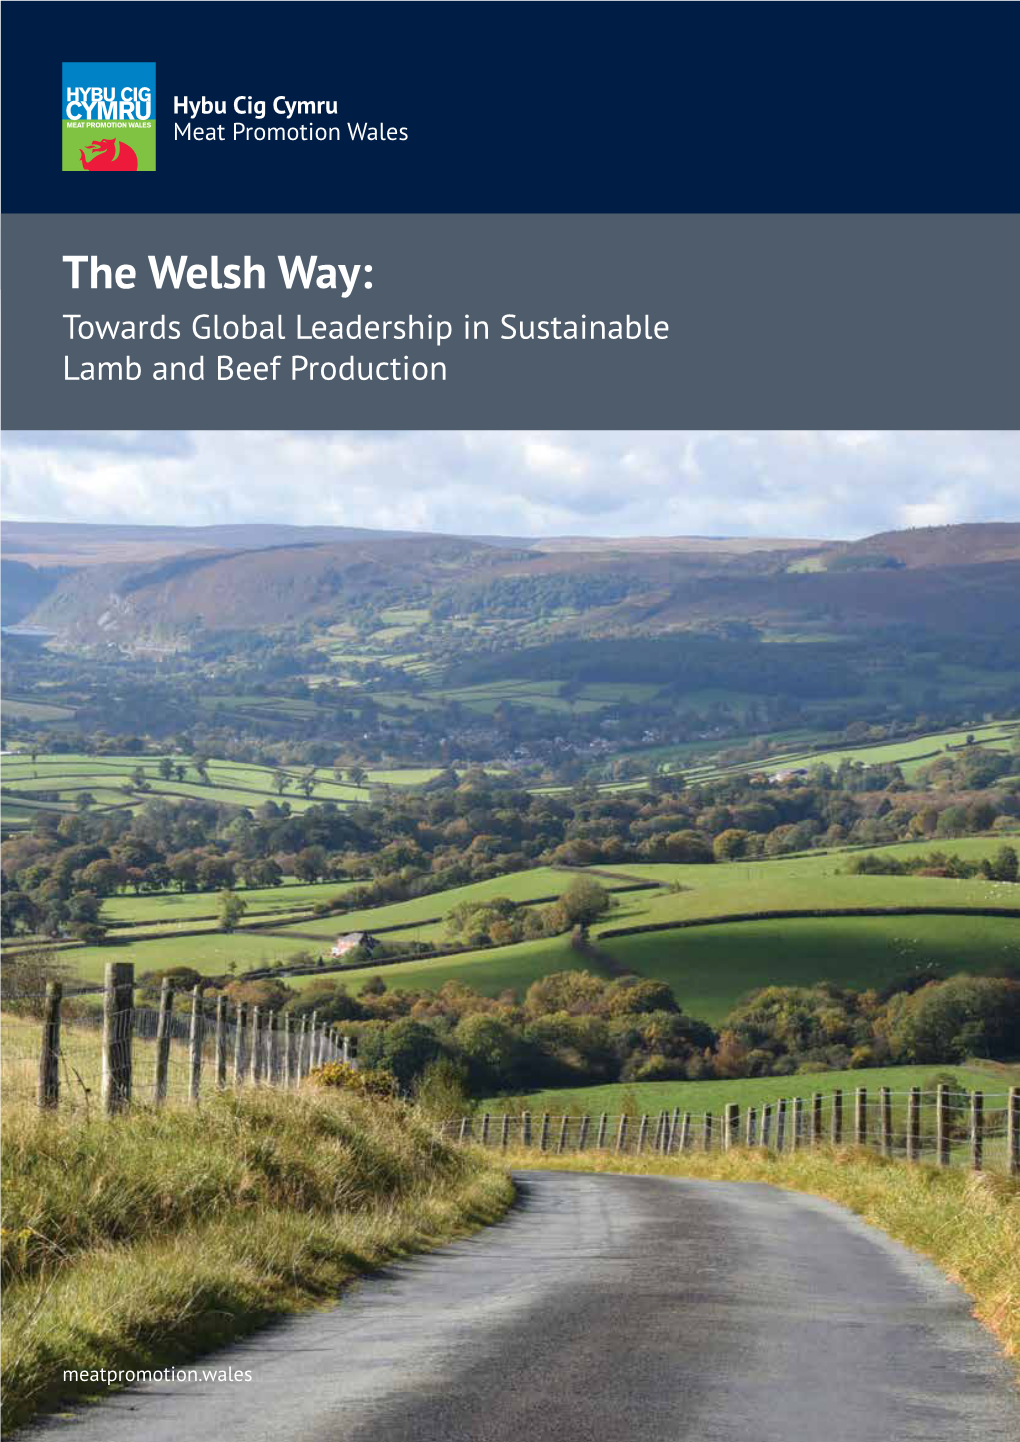 The Welsh Way: Towards Global Leadership in Sustainable Lamb and Beef Production